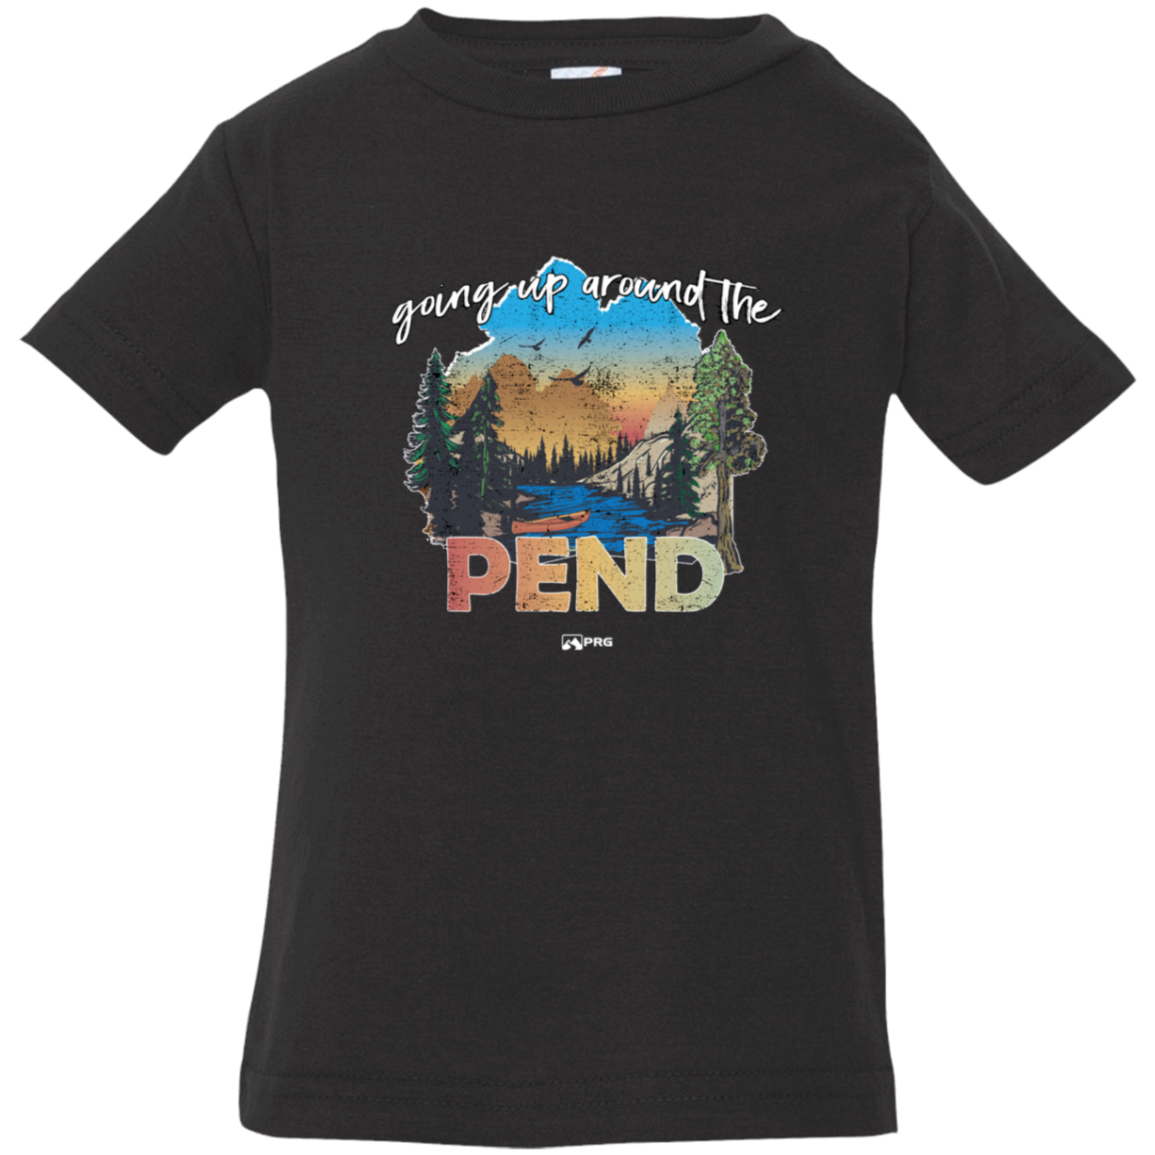 Around the Pend - Infant Shirt